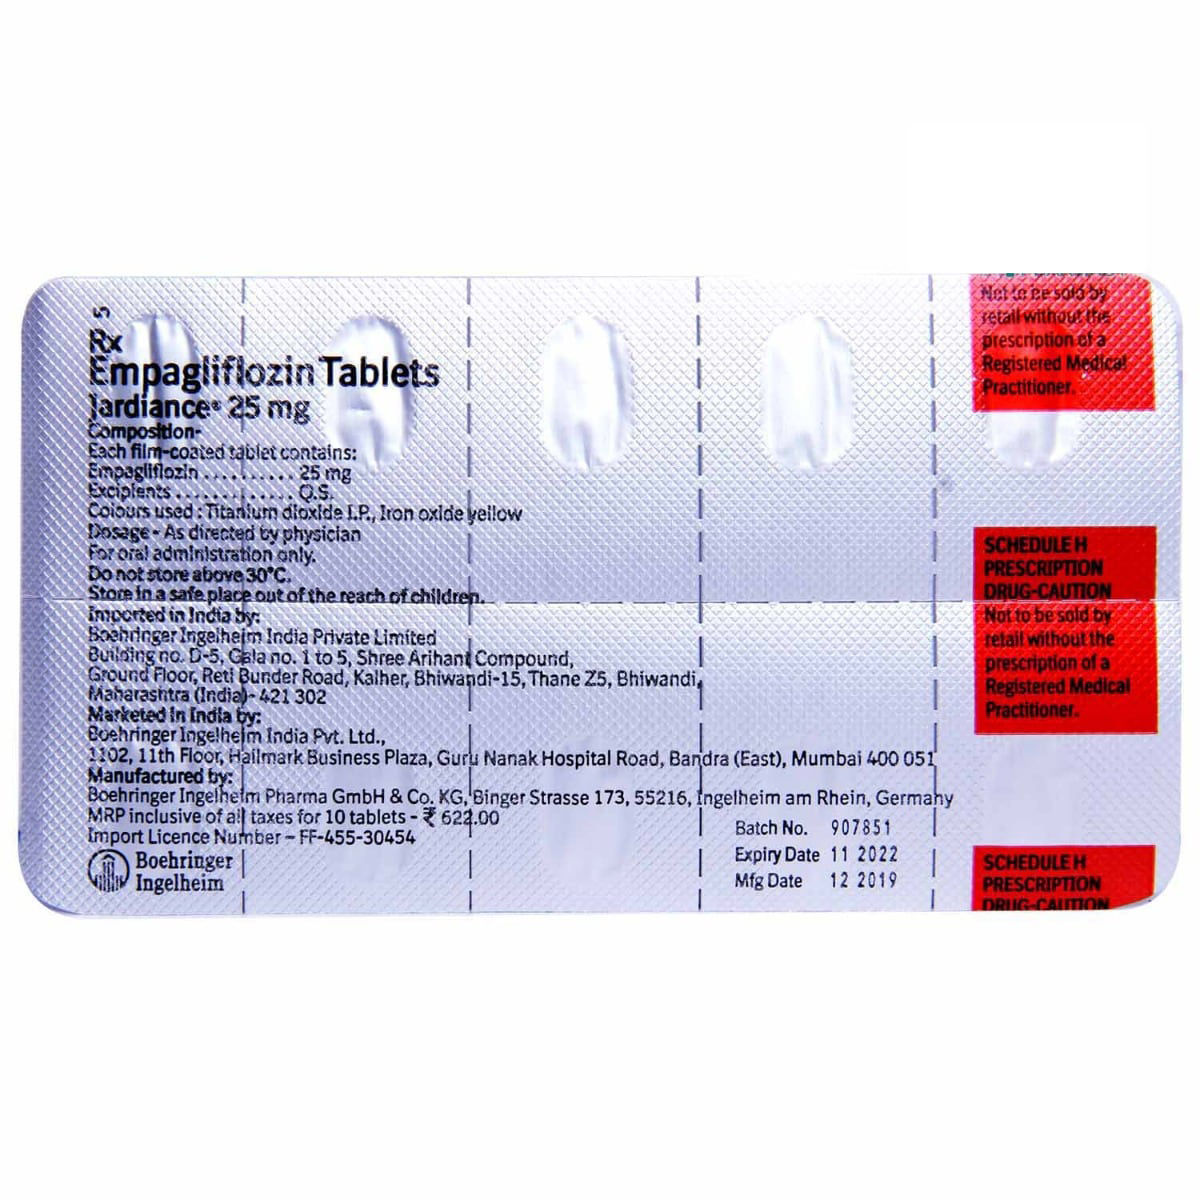 Jardiance 25 mg Tablet 10's Price, Uses, Side Effects, Composition